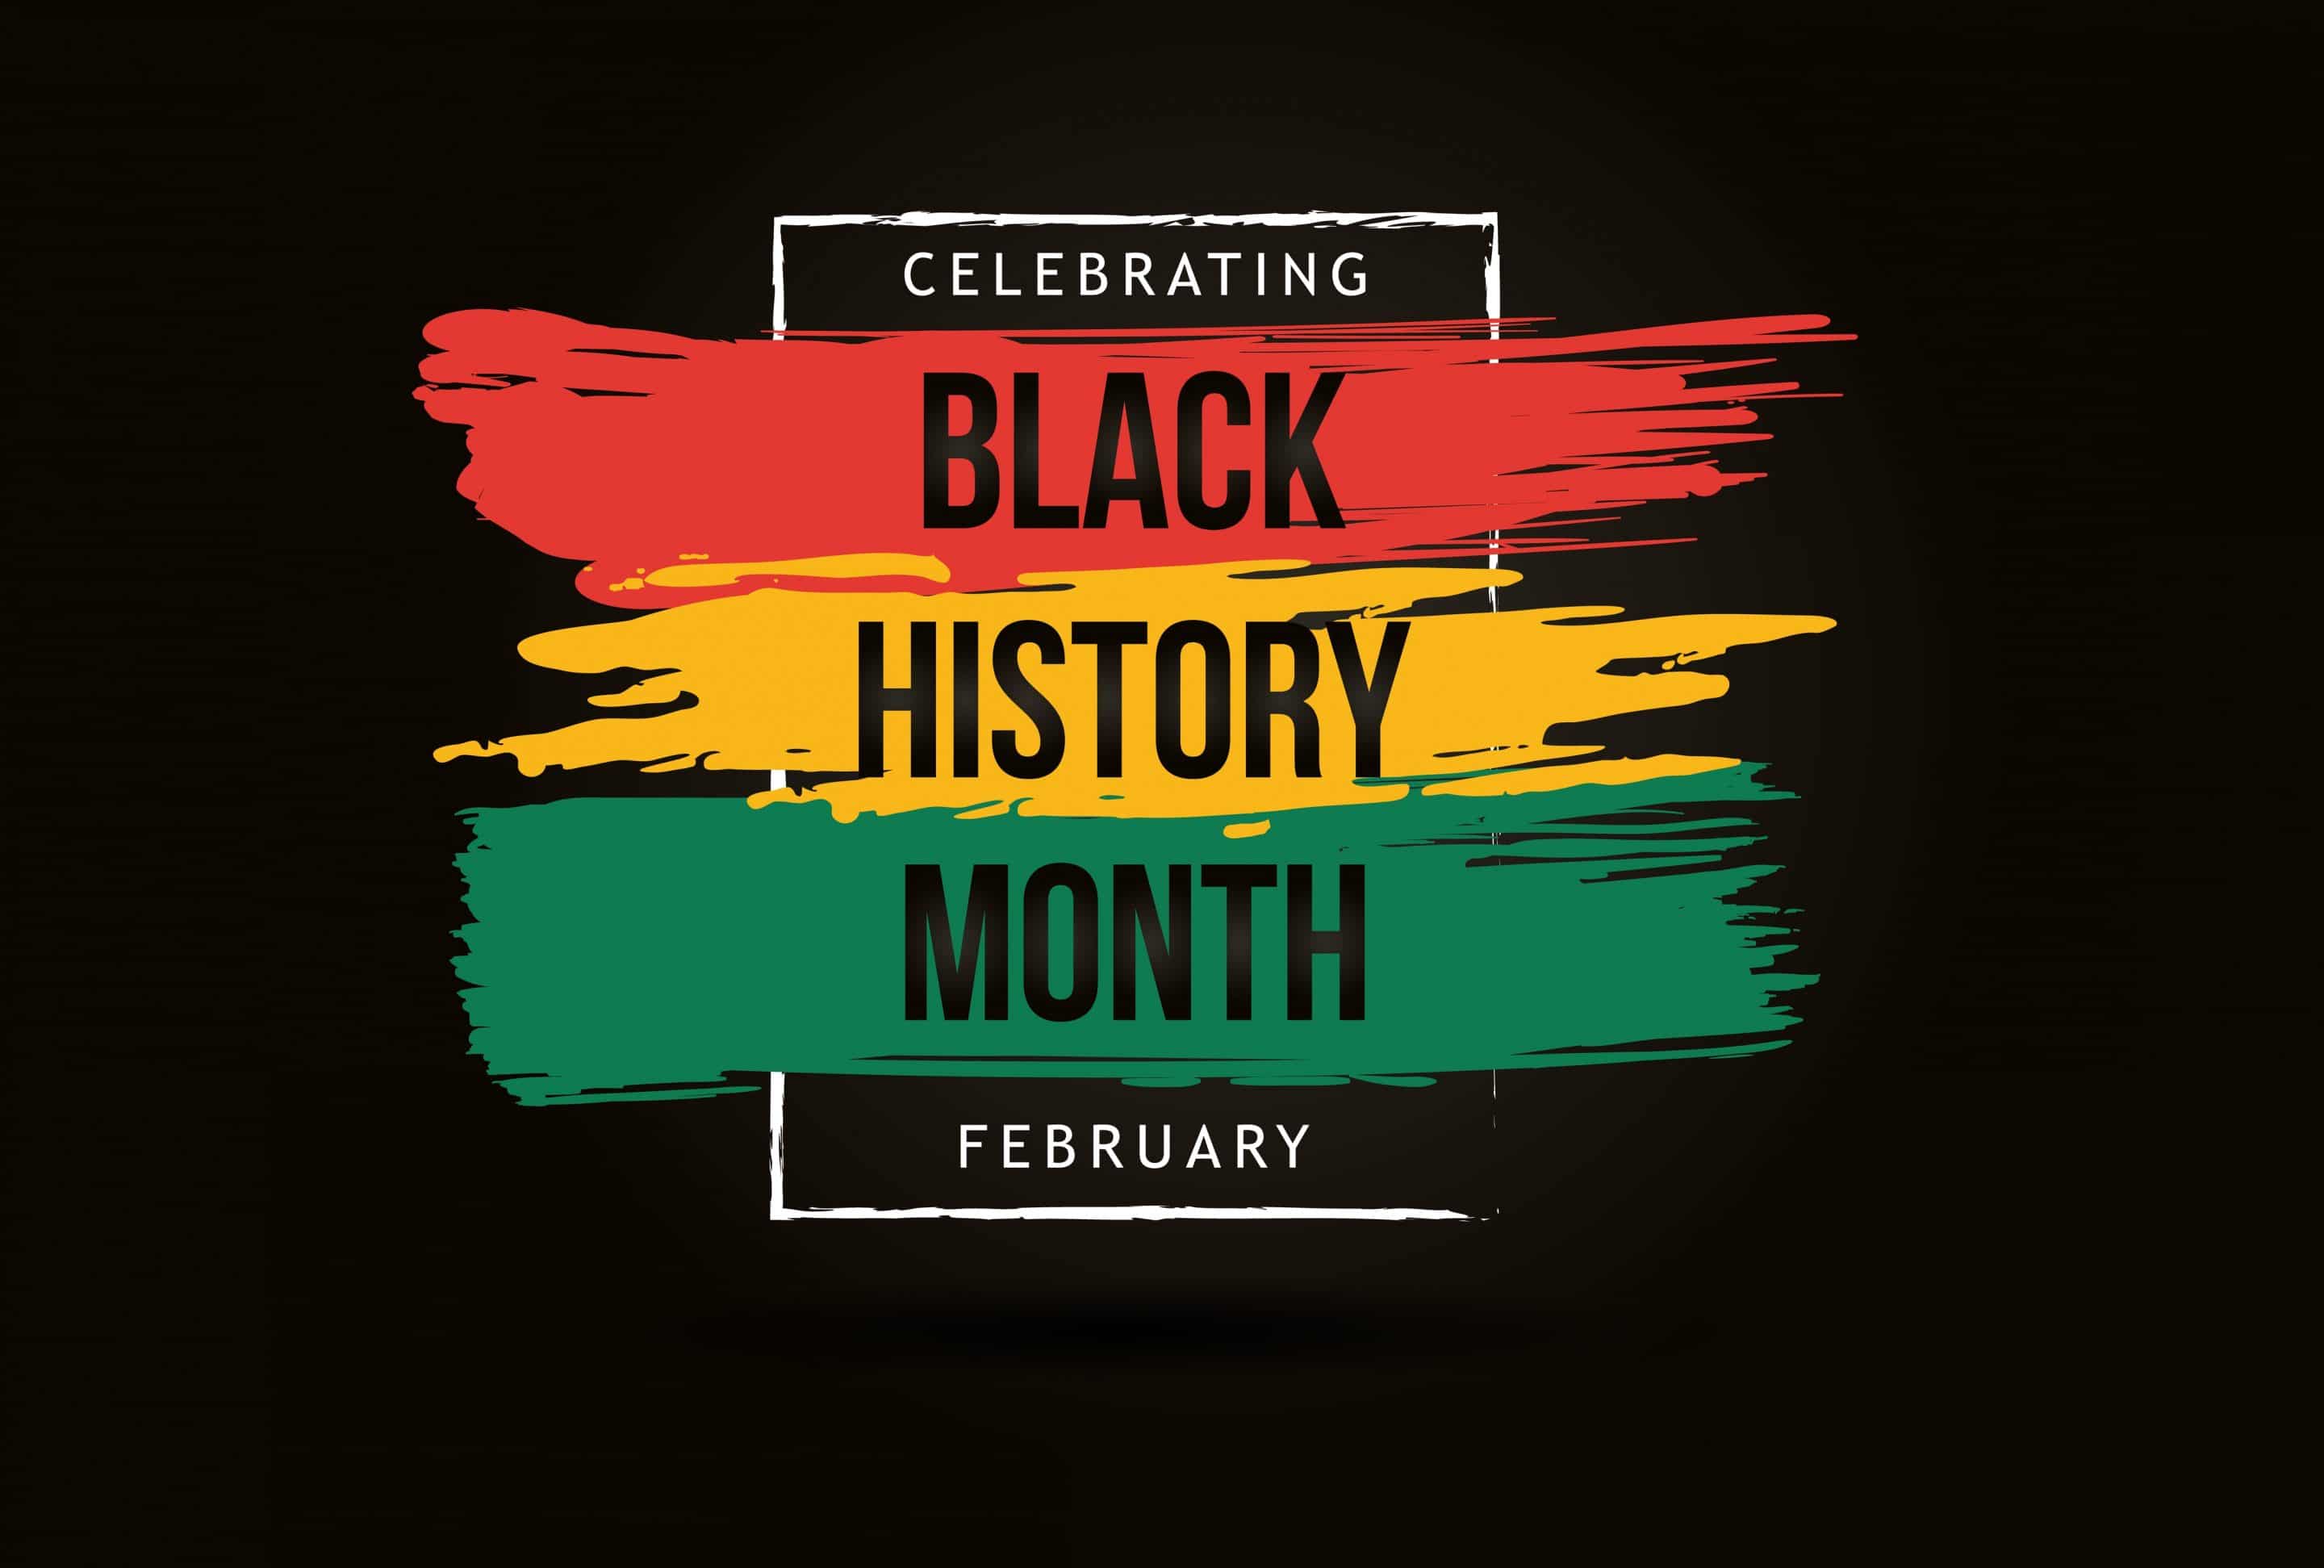 Black History Month: A panel conversation on the Black experience in the  Faculty of Applied Science - Event